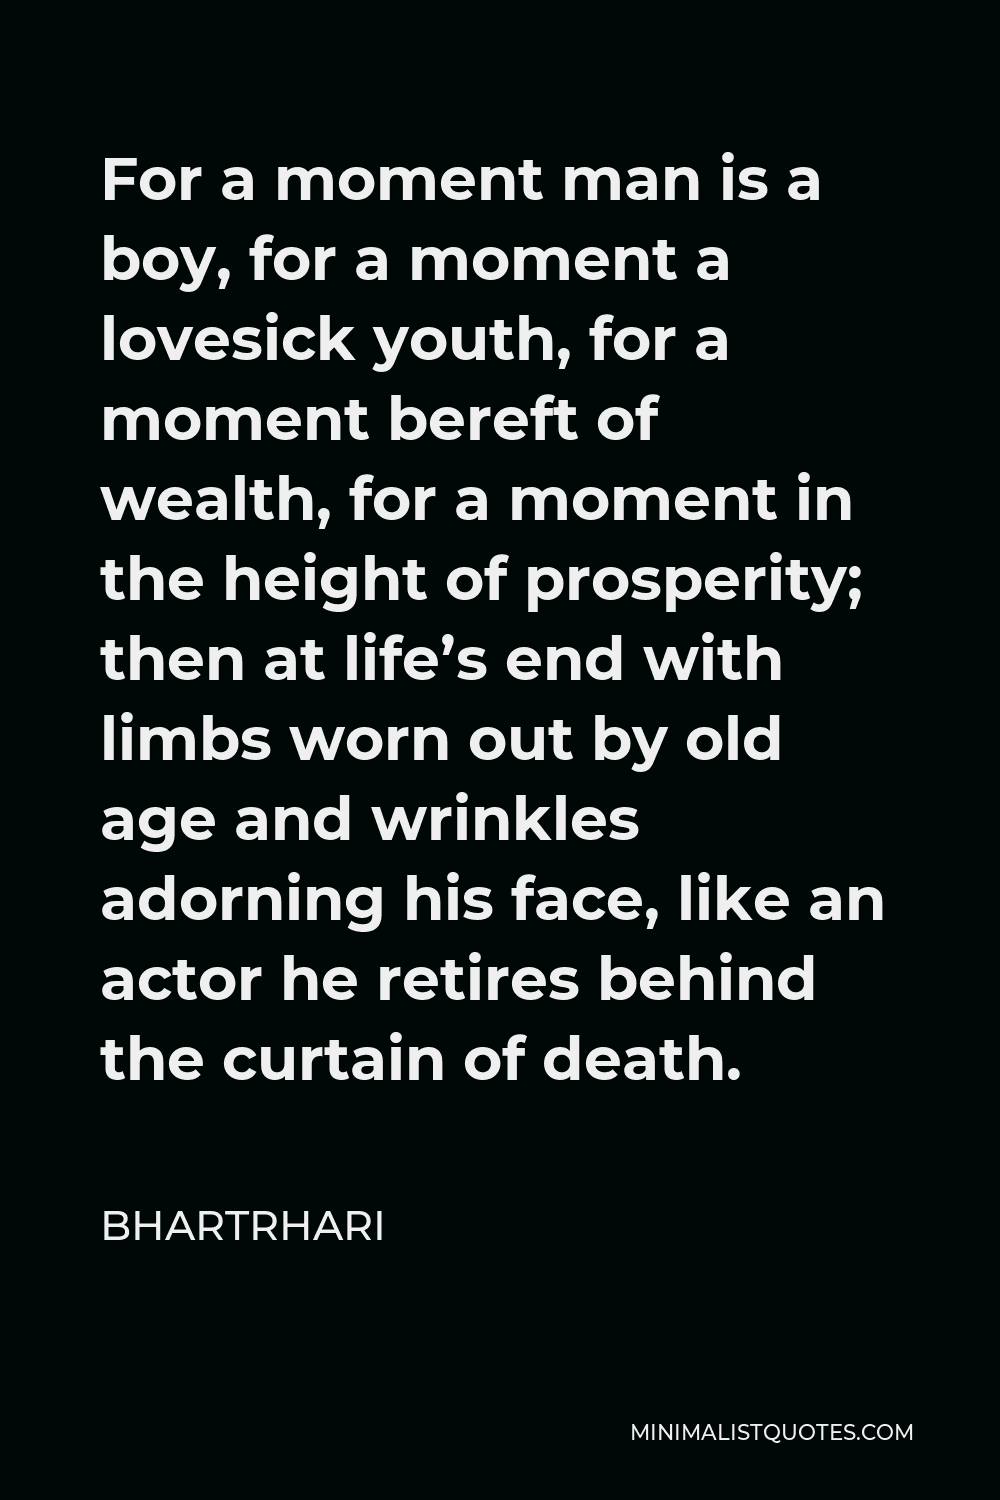 Bhartrhari Quote - For a moment man is a boy, for a moment a lovesick youth, for a moment bereft of wealth, for a moment in the height of prosperity; then at life’s end with limbs worn out by old age and wrinkles adorning his face, like an actor he retires behind the curtain of death.